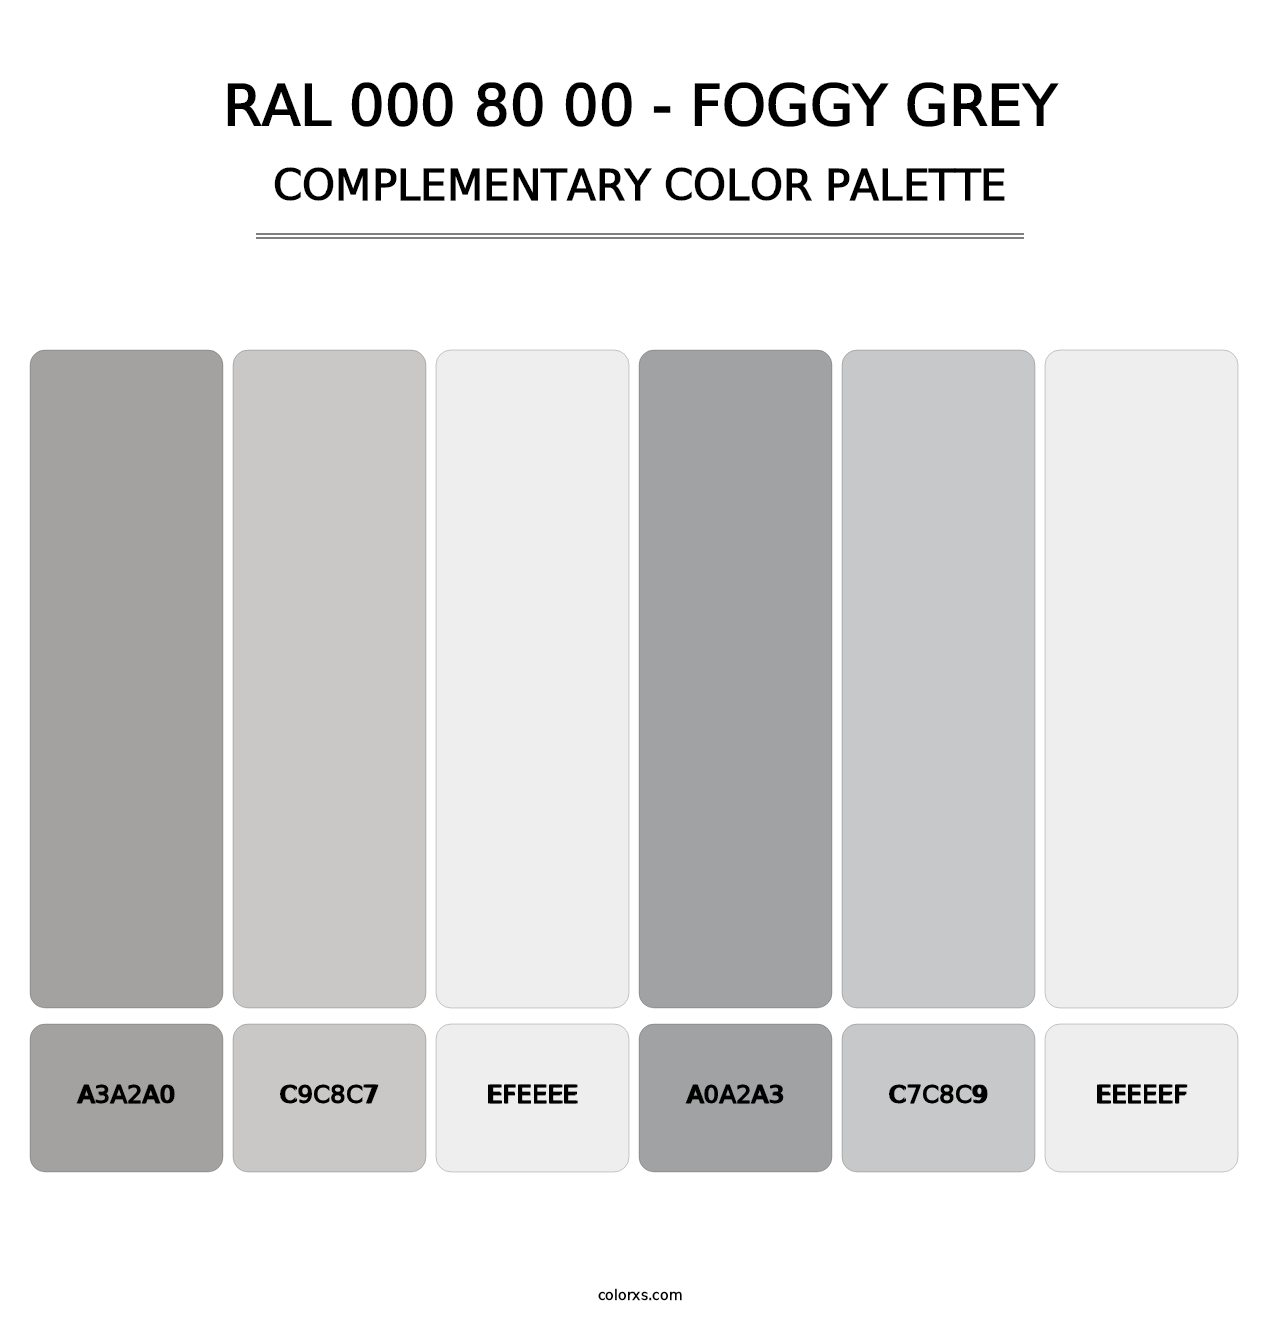 RAL 000 80 00 - Foggy Grey - Complementary Color Palette